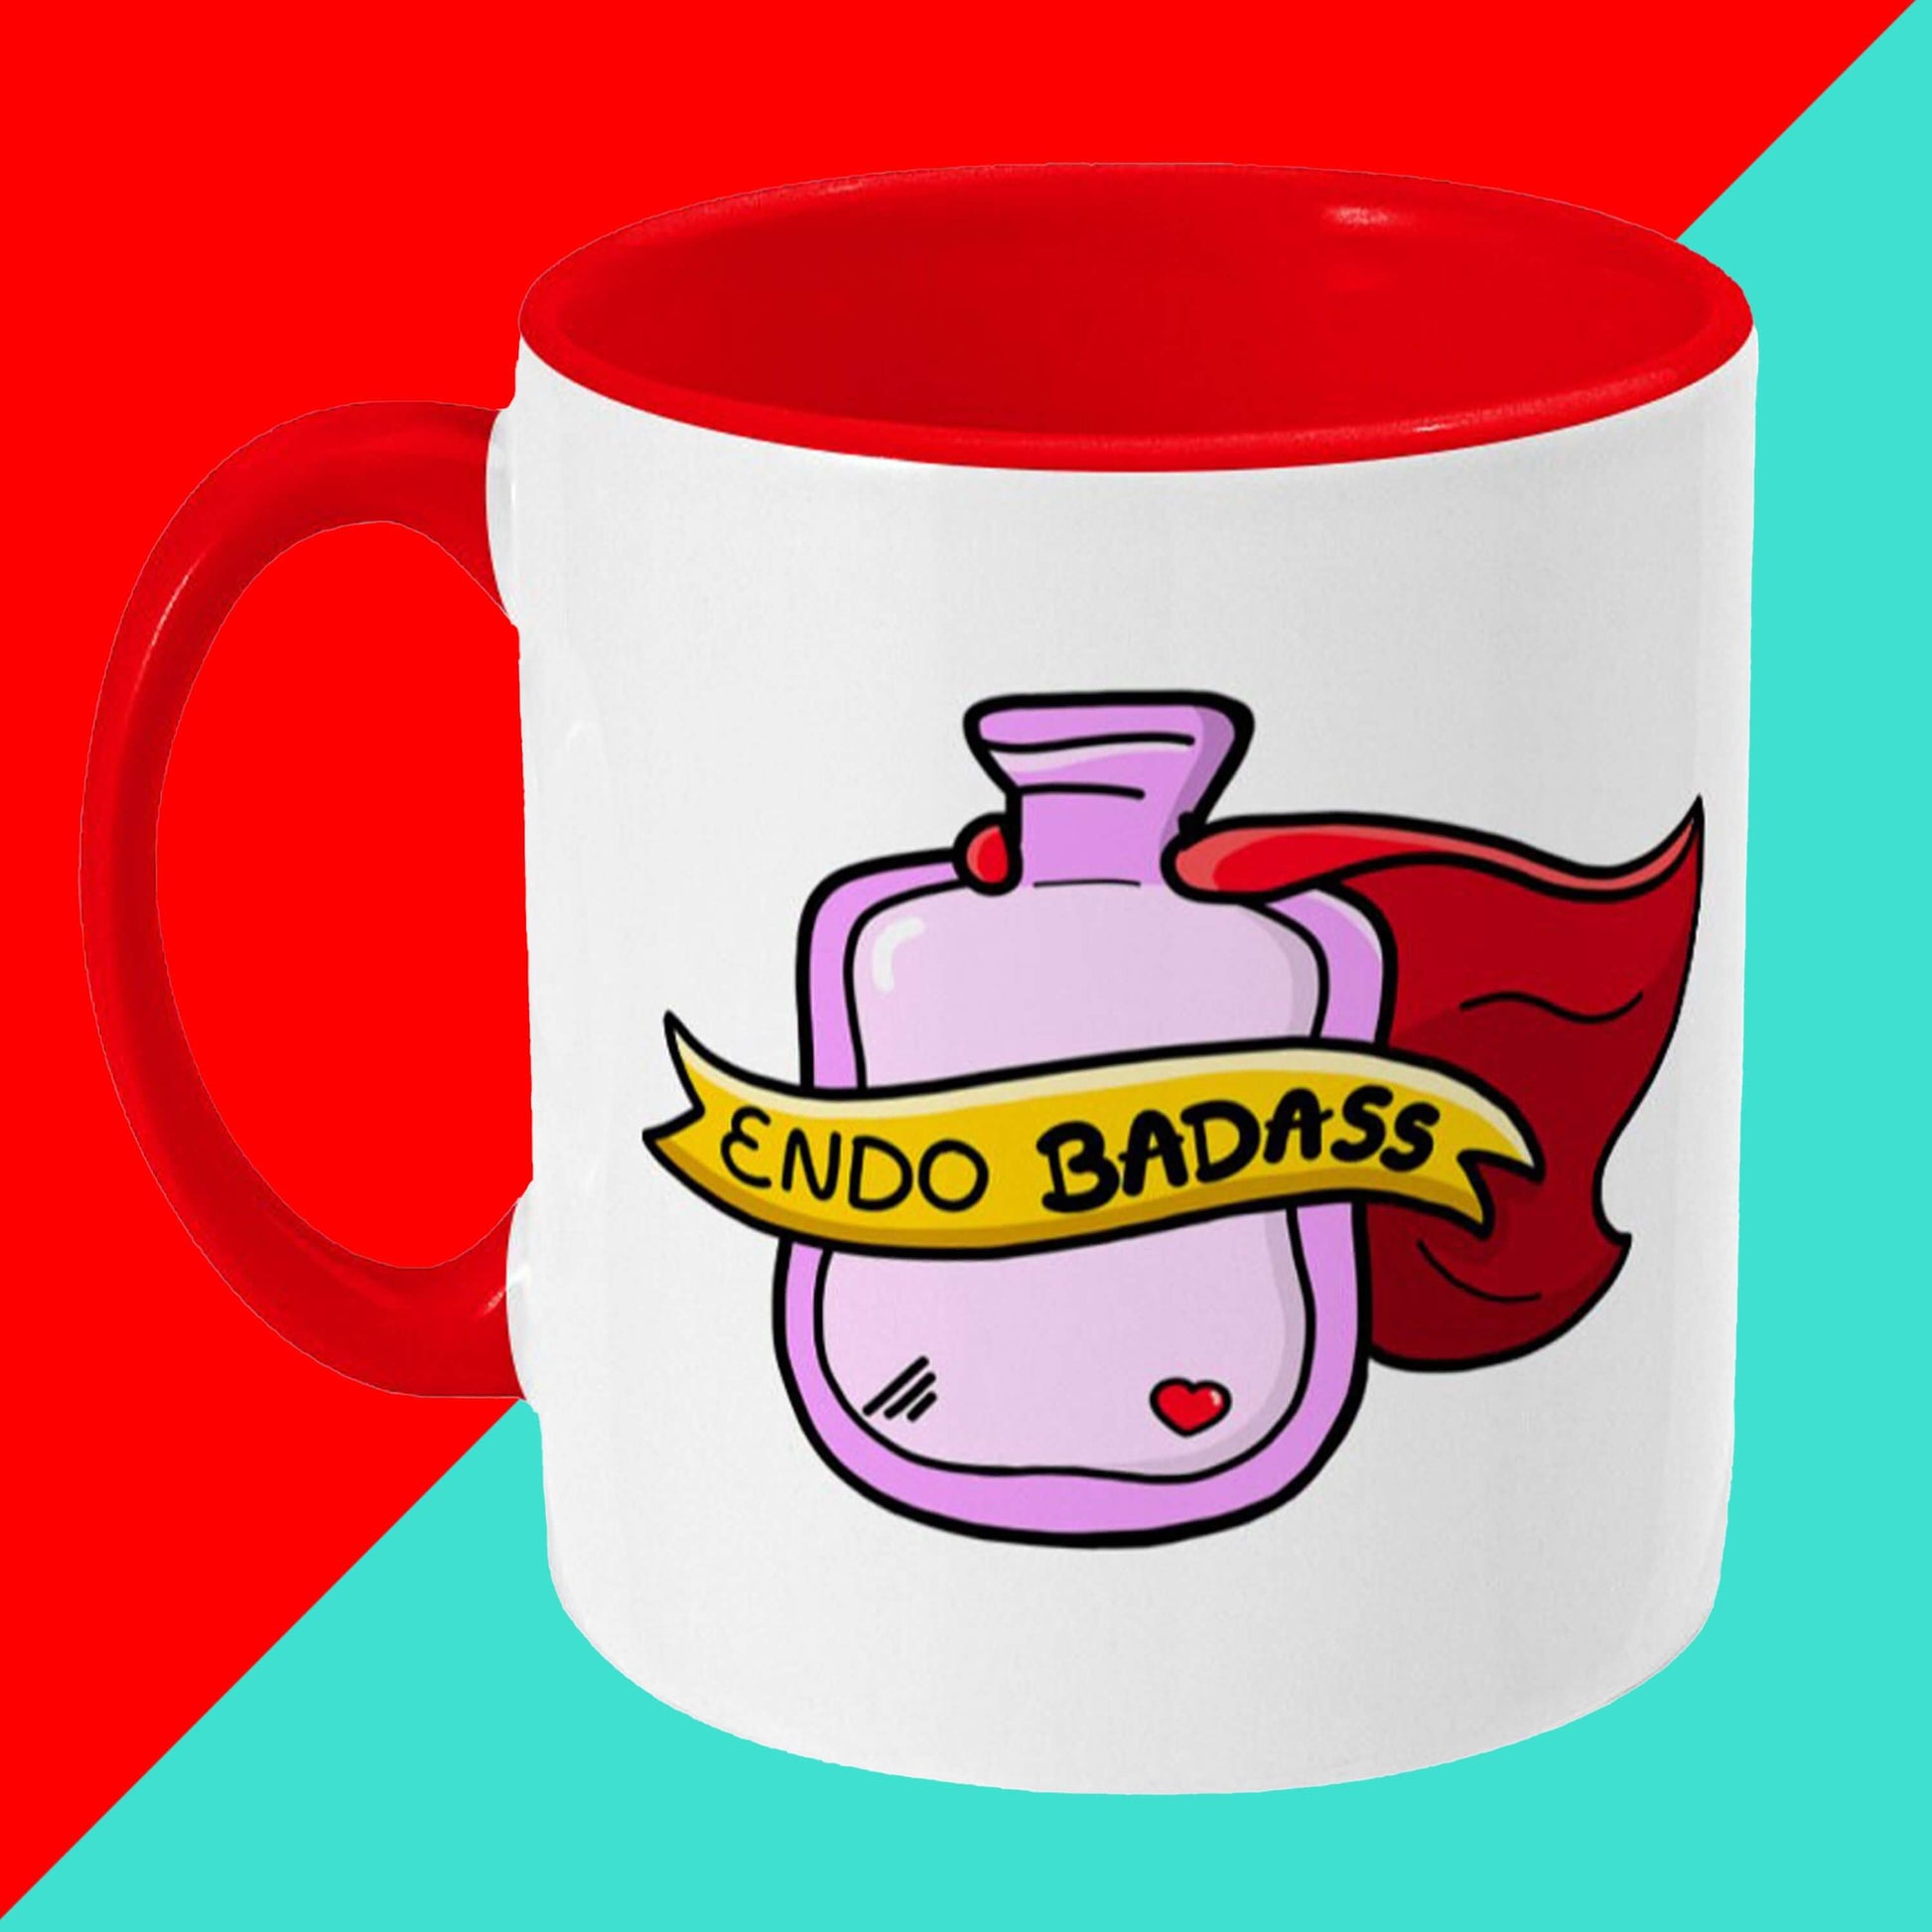 Endo Badass Mug - Endometriosis shown on a red and blue background. The white mug has a red handle and inside with an illustration of a pink hot water bottle wearing a red cape. There is a yellow banner across the bottle with black text inside that reads 'endo badass'. Hand drawn design made to raise awareness for endometriosis.